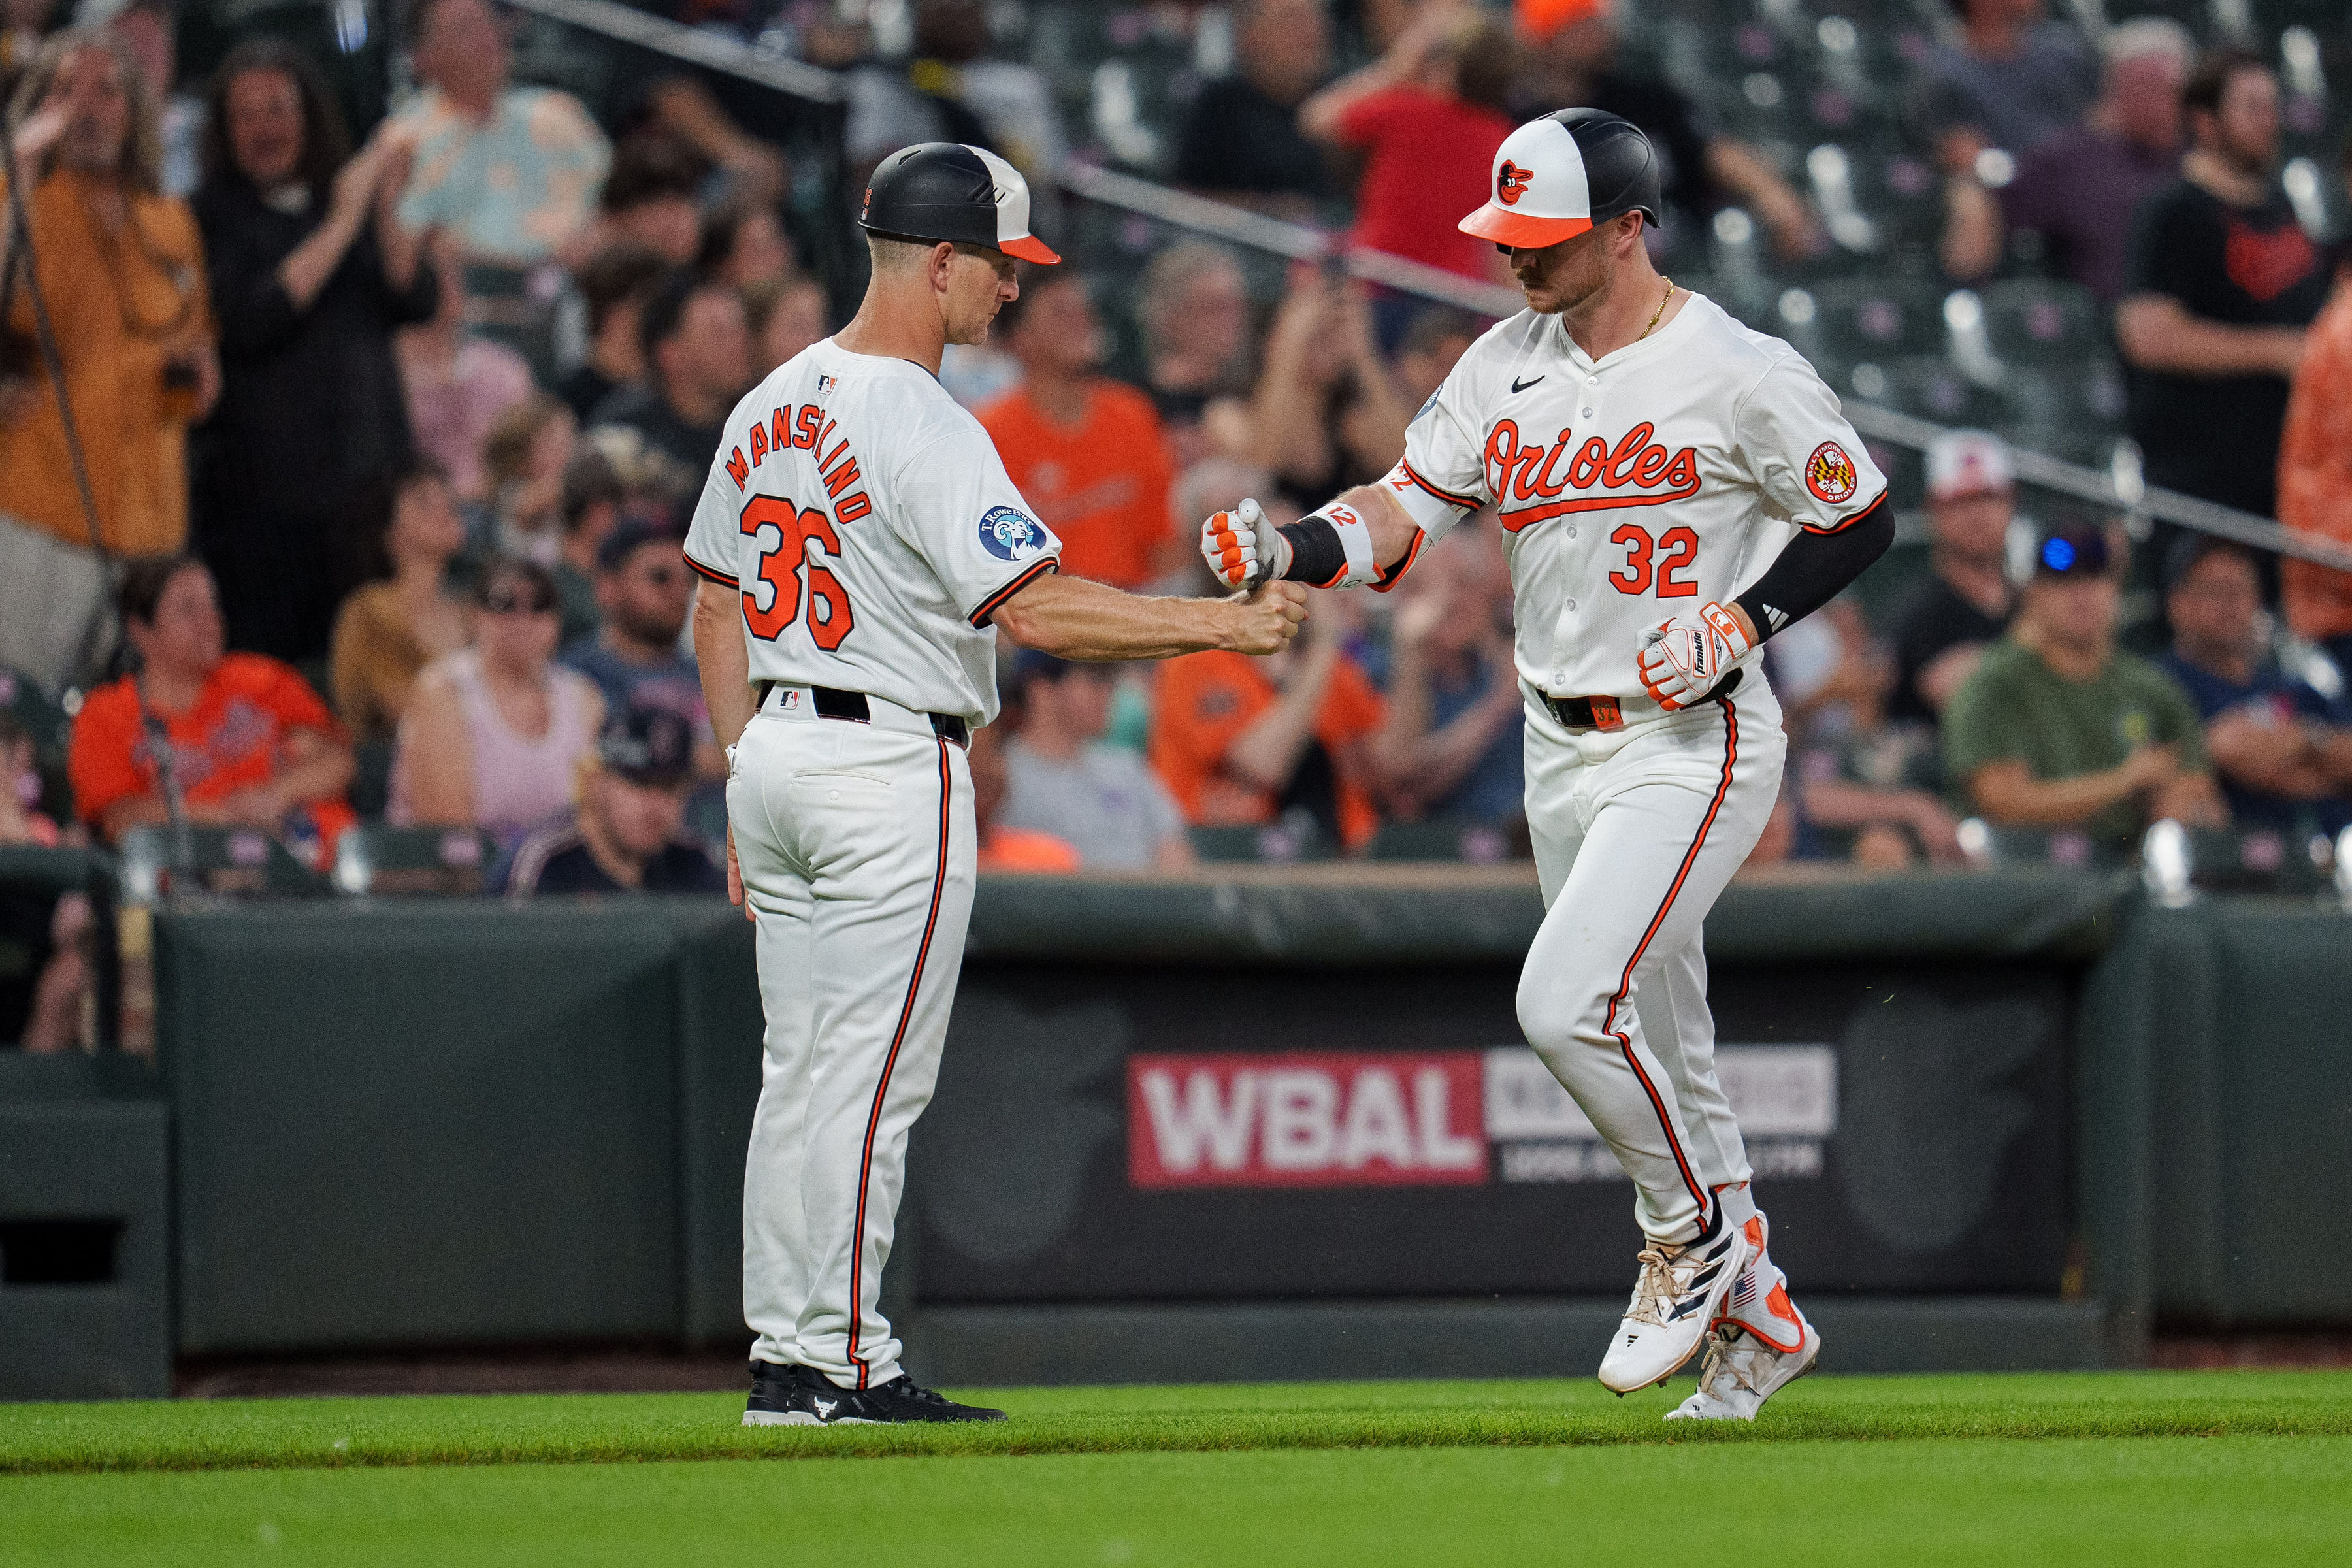 The Orioles bounced back with a big win